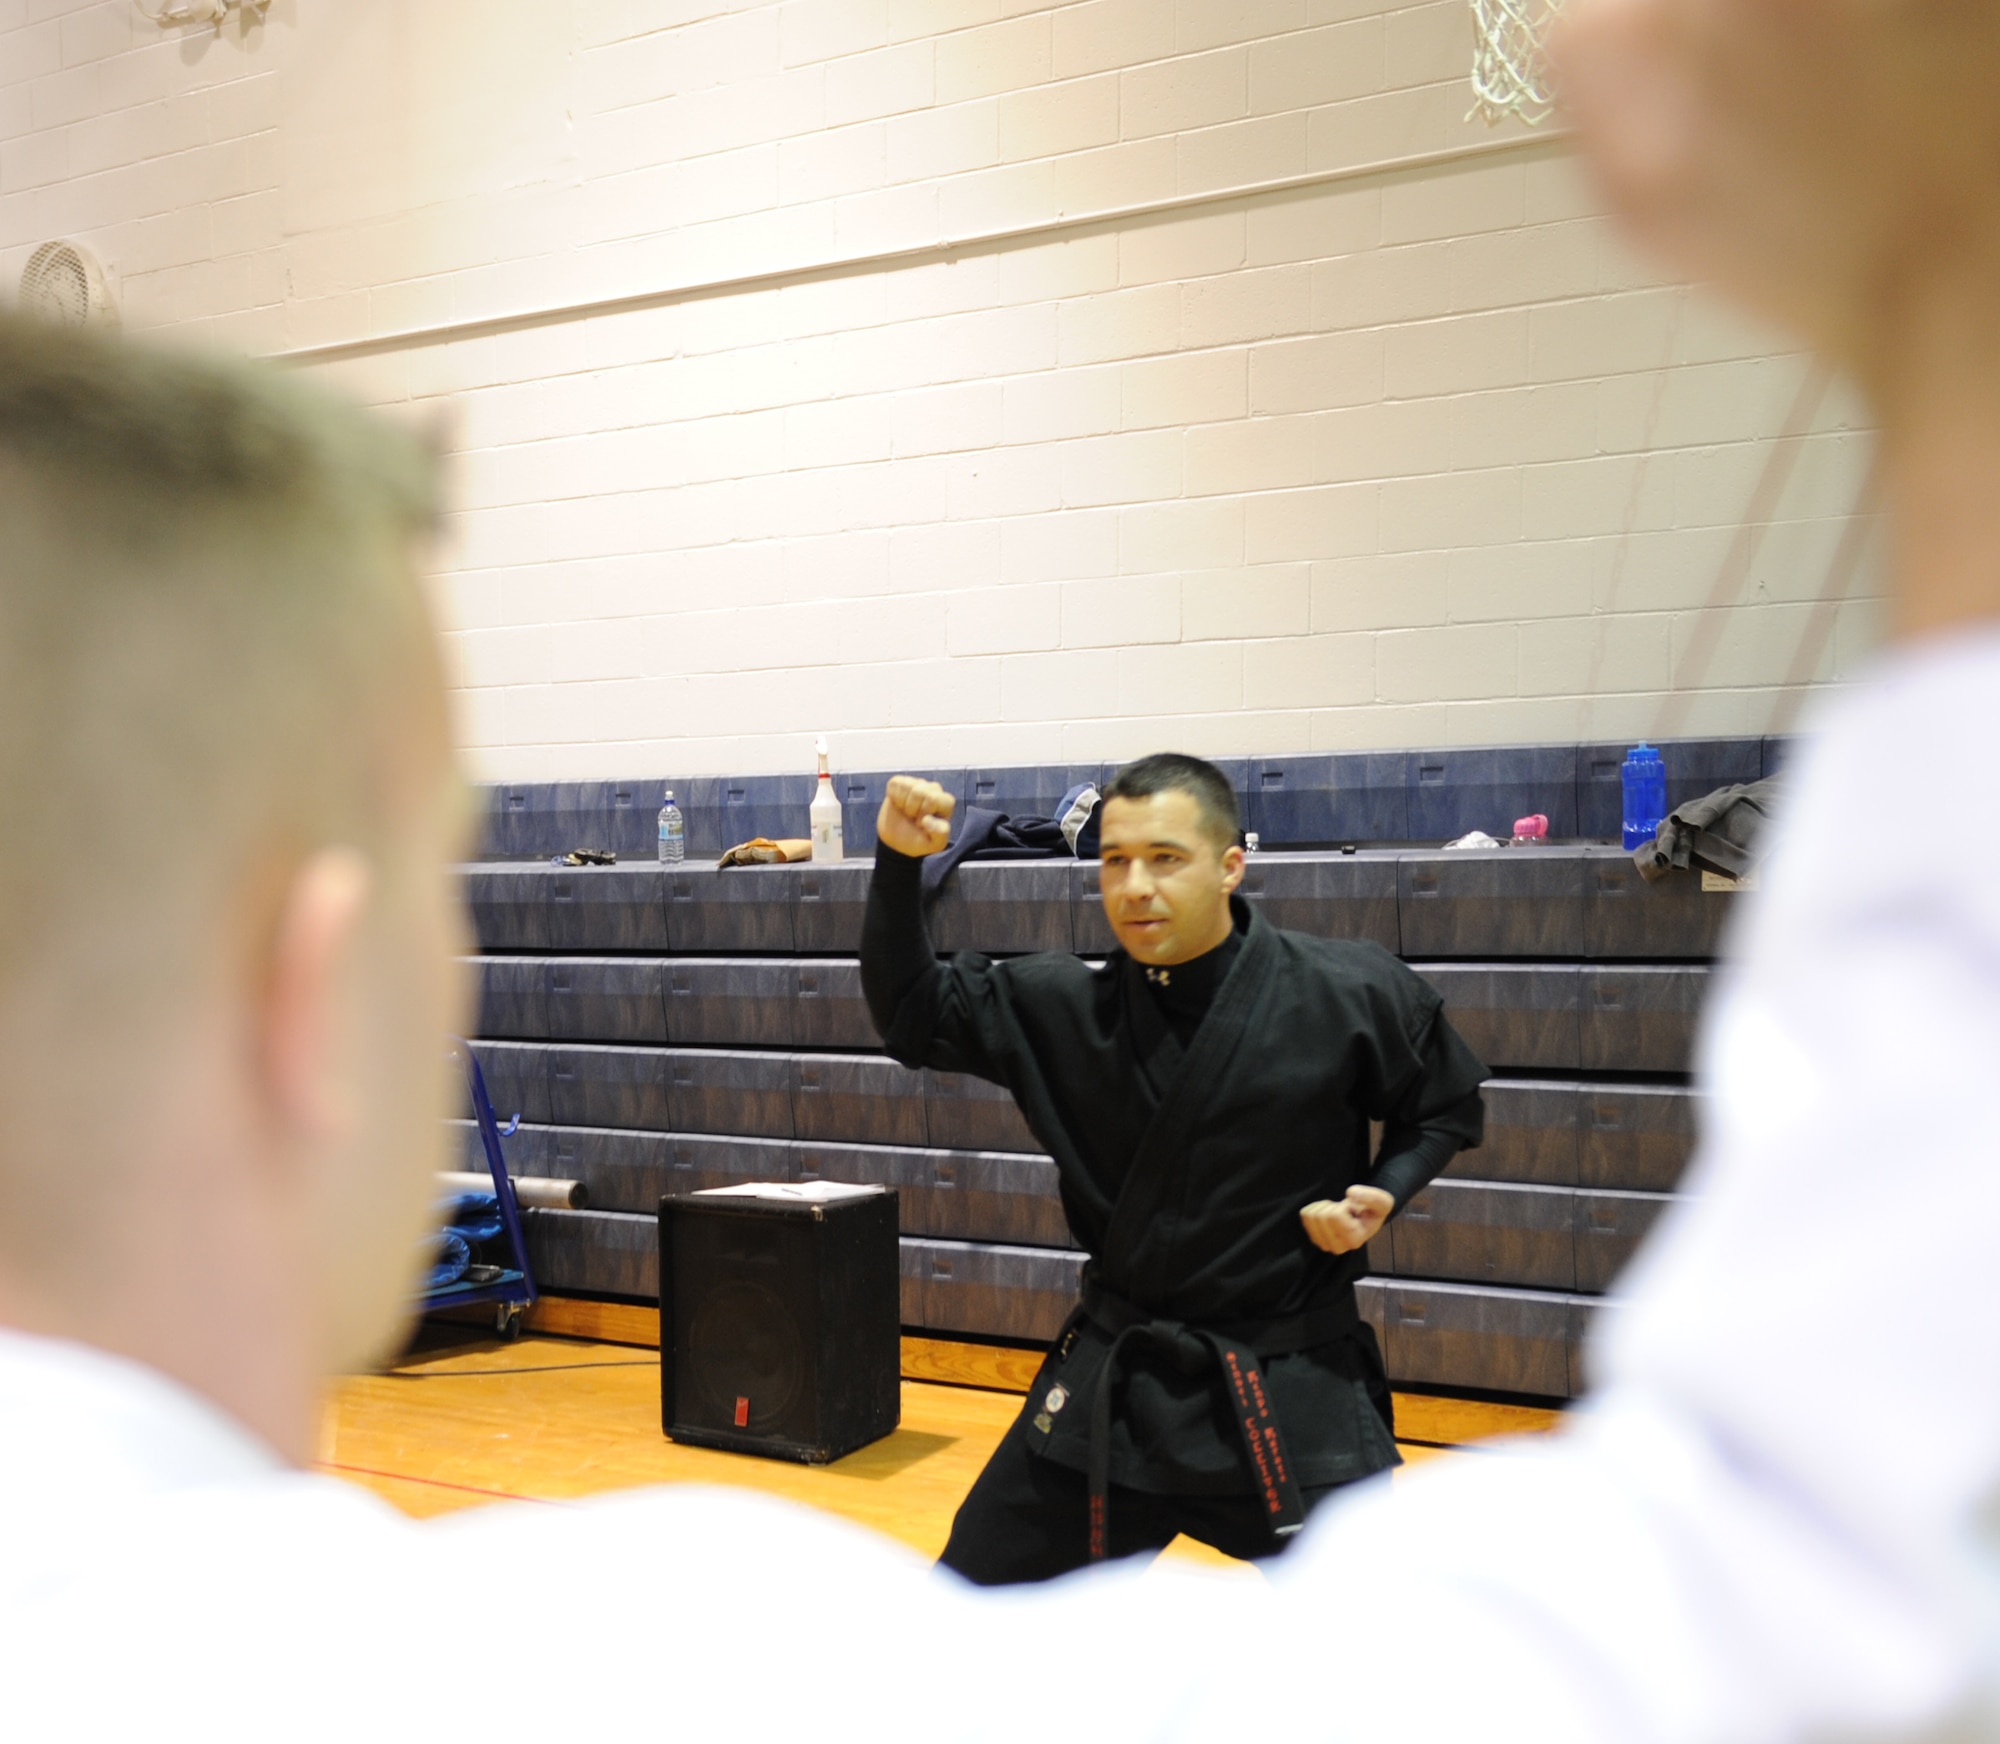 WHITEMAN AIR FORCE BASE, Mo. – Sensei Larry Tolliver, Kenpo Instructor, critics his students as they perform an inward block Feb. 2. Kenpo is a Japanese term that translates to mean “Law of the Fist.” Classes are Mondays and Wednesdays from 5 – 6 p.m. at the fitness center for $8 a class. (U.S. Air Force photo/Senior Airman Stephen Linch)